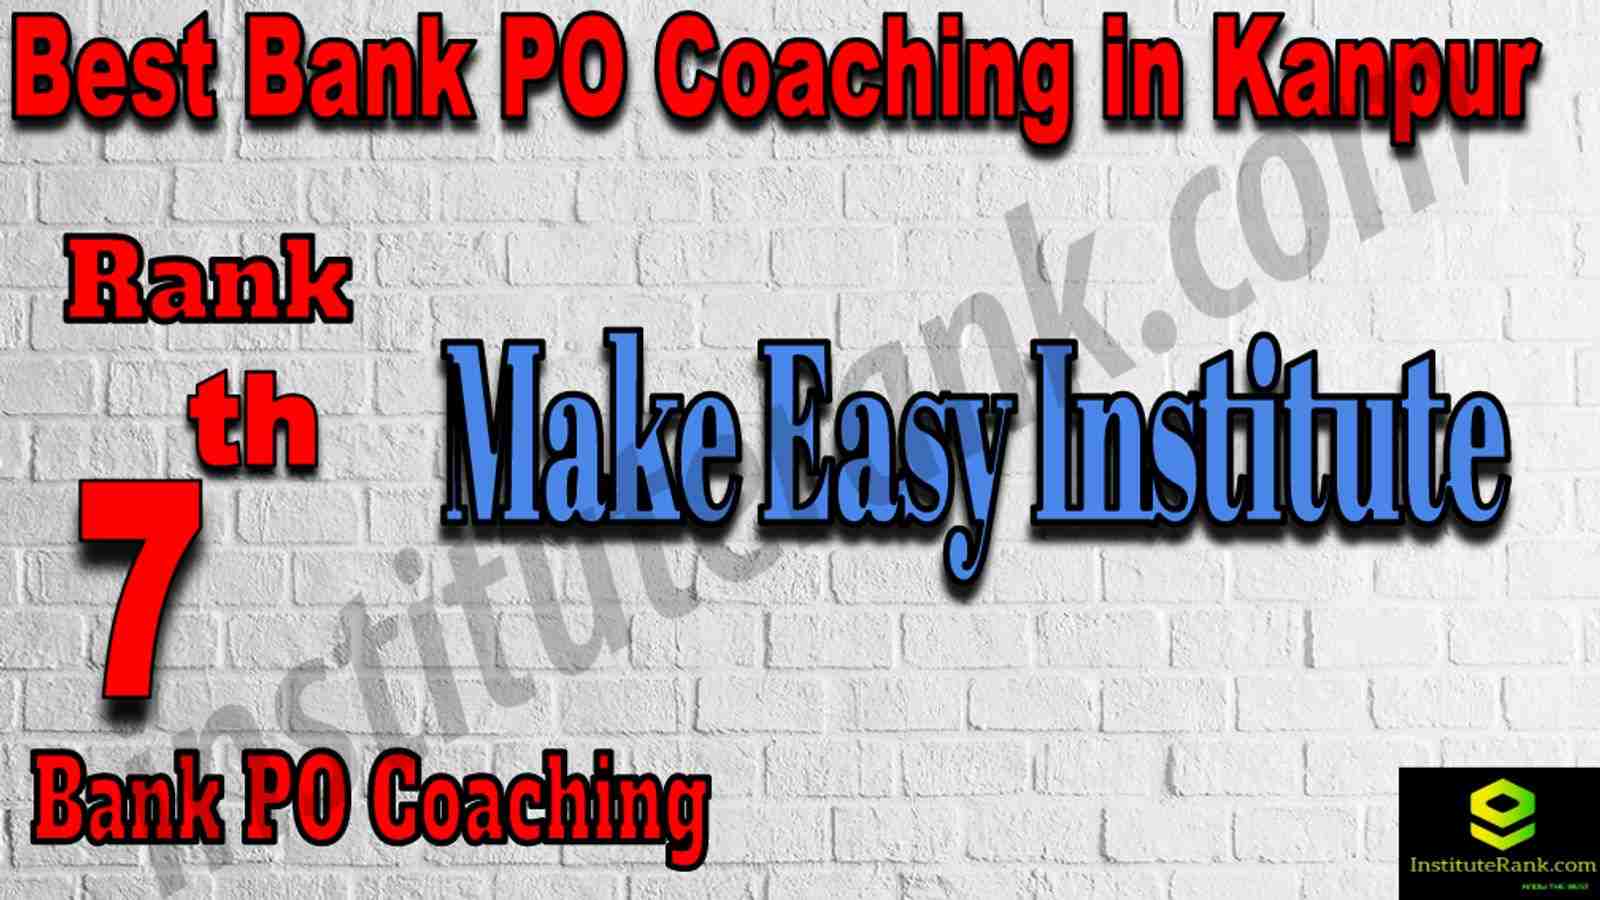 7th Best Bank PO Coaching in Kanpur